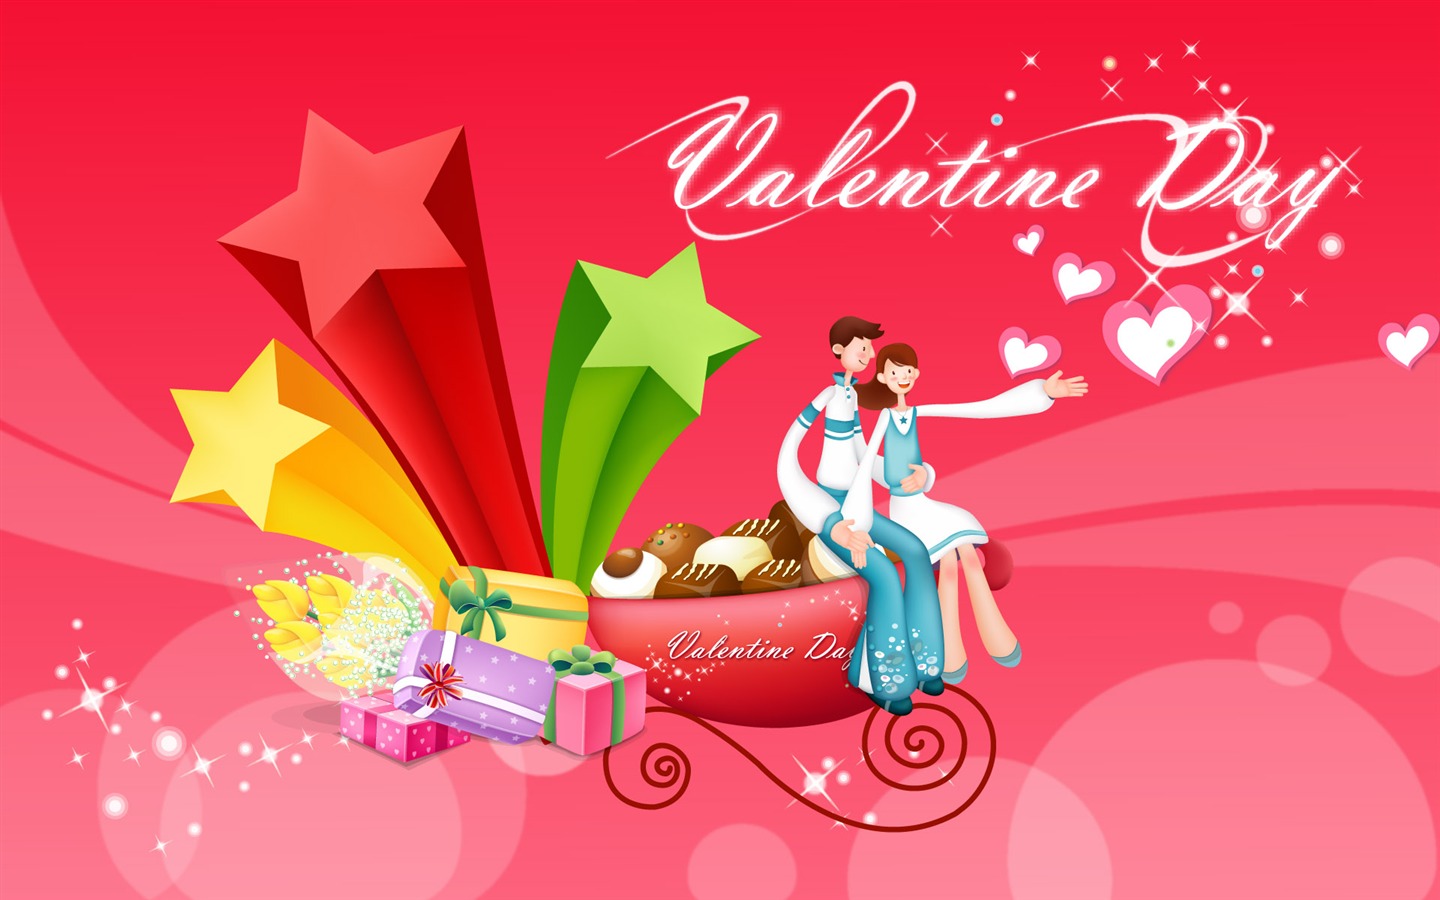 Valentine's Day Theme Wallpapers (2) #1 - 1440x900